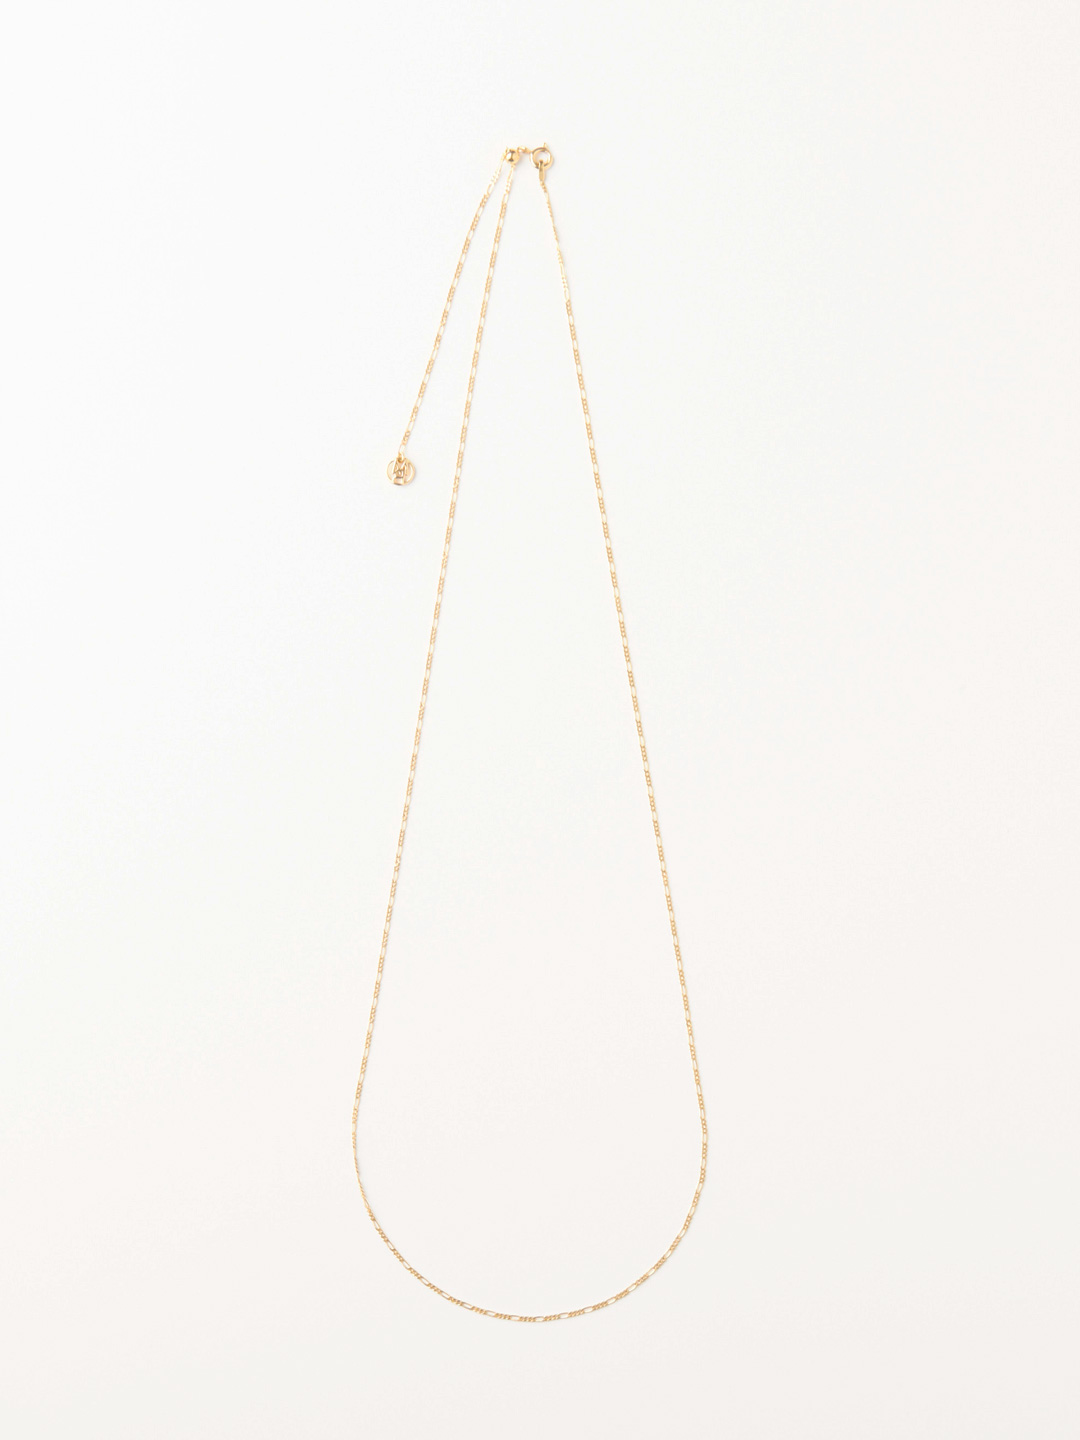 Samira 75 Belly Chain/Necklace - Yellow Gold